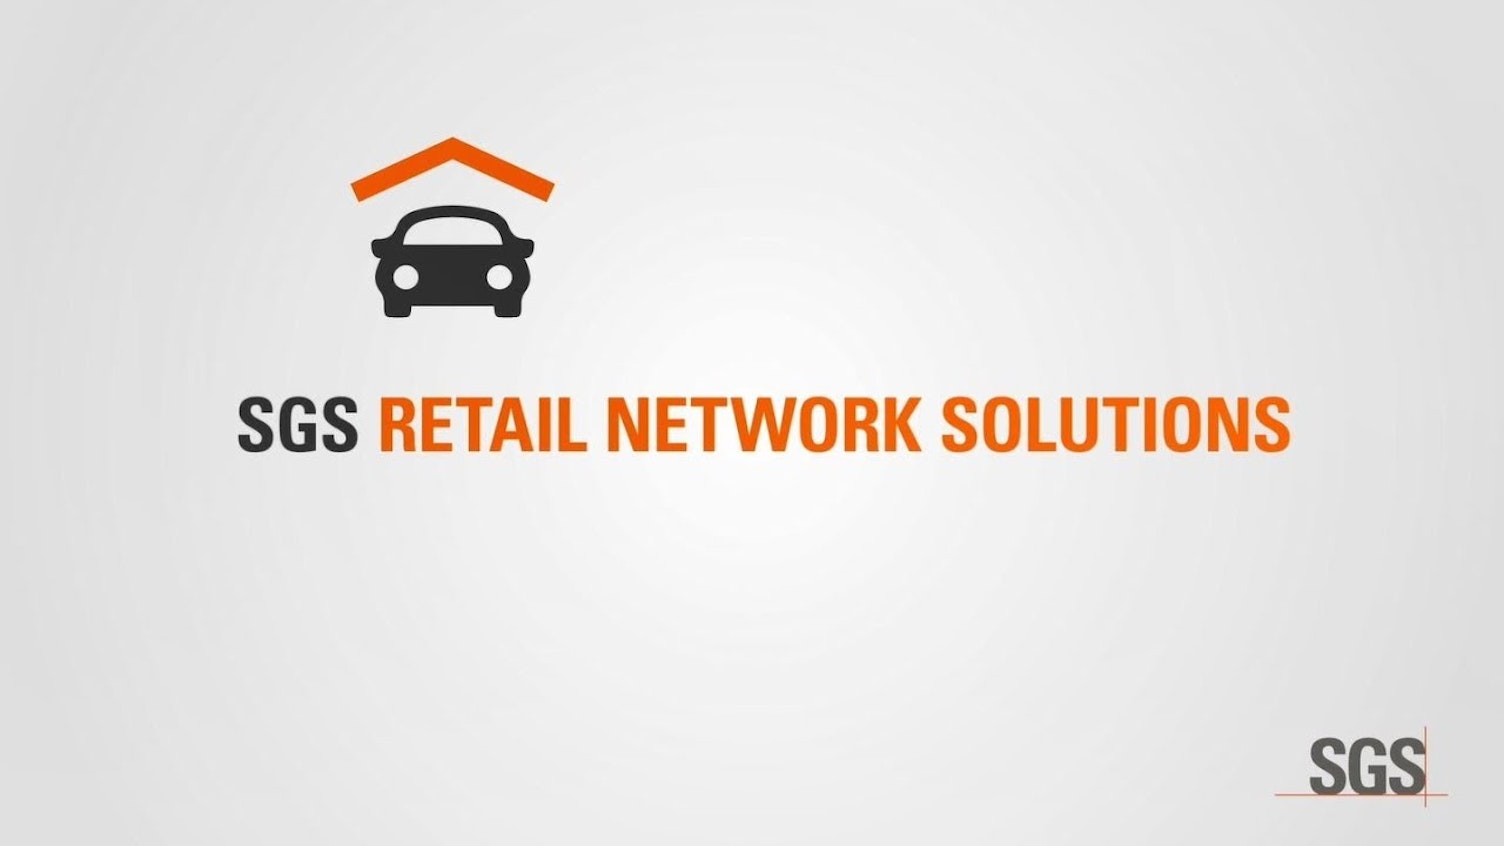 SGS Retail Network Solutions – Sales Incentive Audit at Car Dealerships